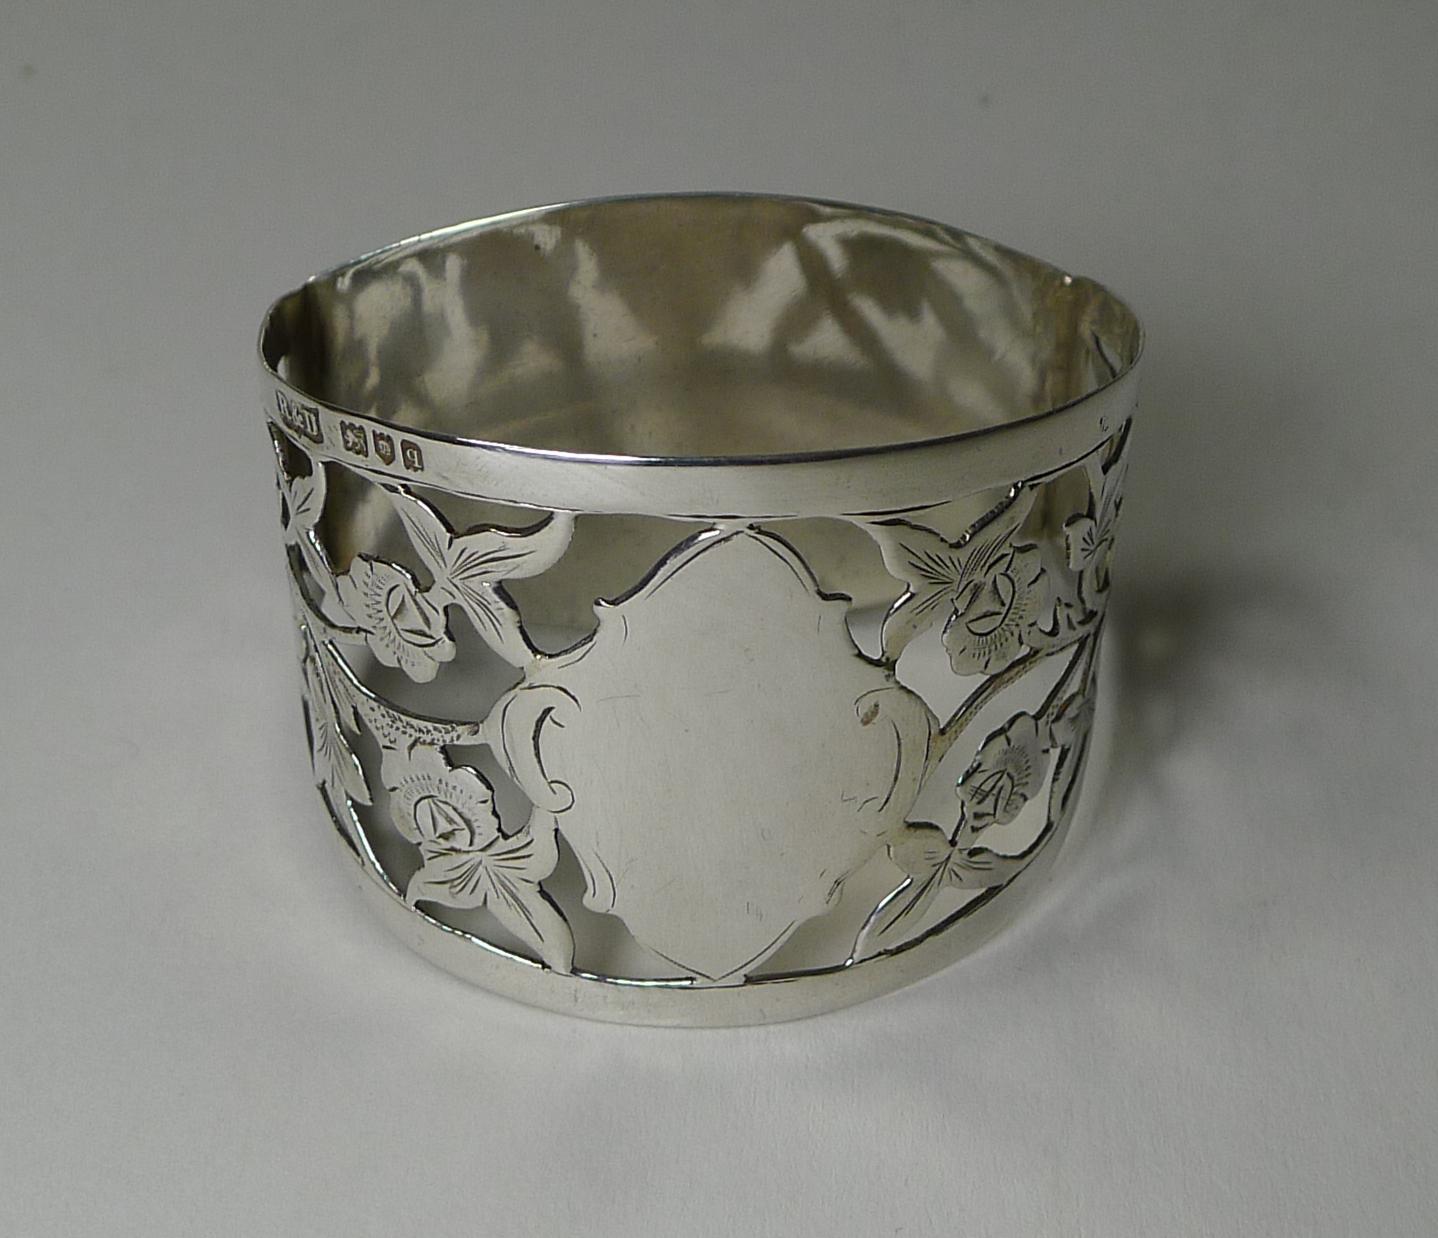 A stunning English napkin ring, pierced or reticulated, decorated with rose decoration.

Fully hallmarked for London 1911 together with the maker's mark for Roberts and Dore. 

Excellent condition measuring 2